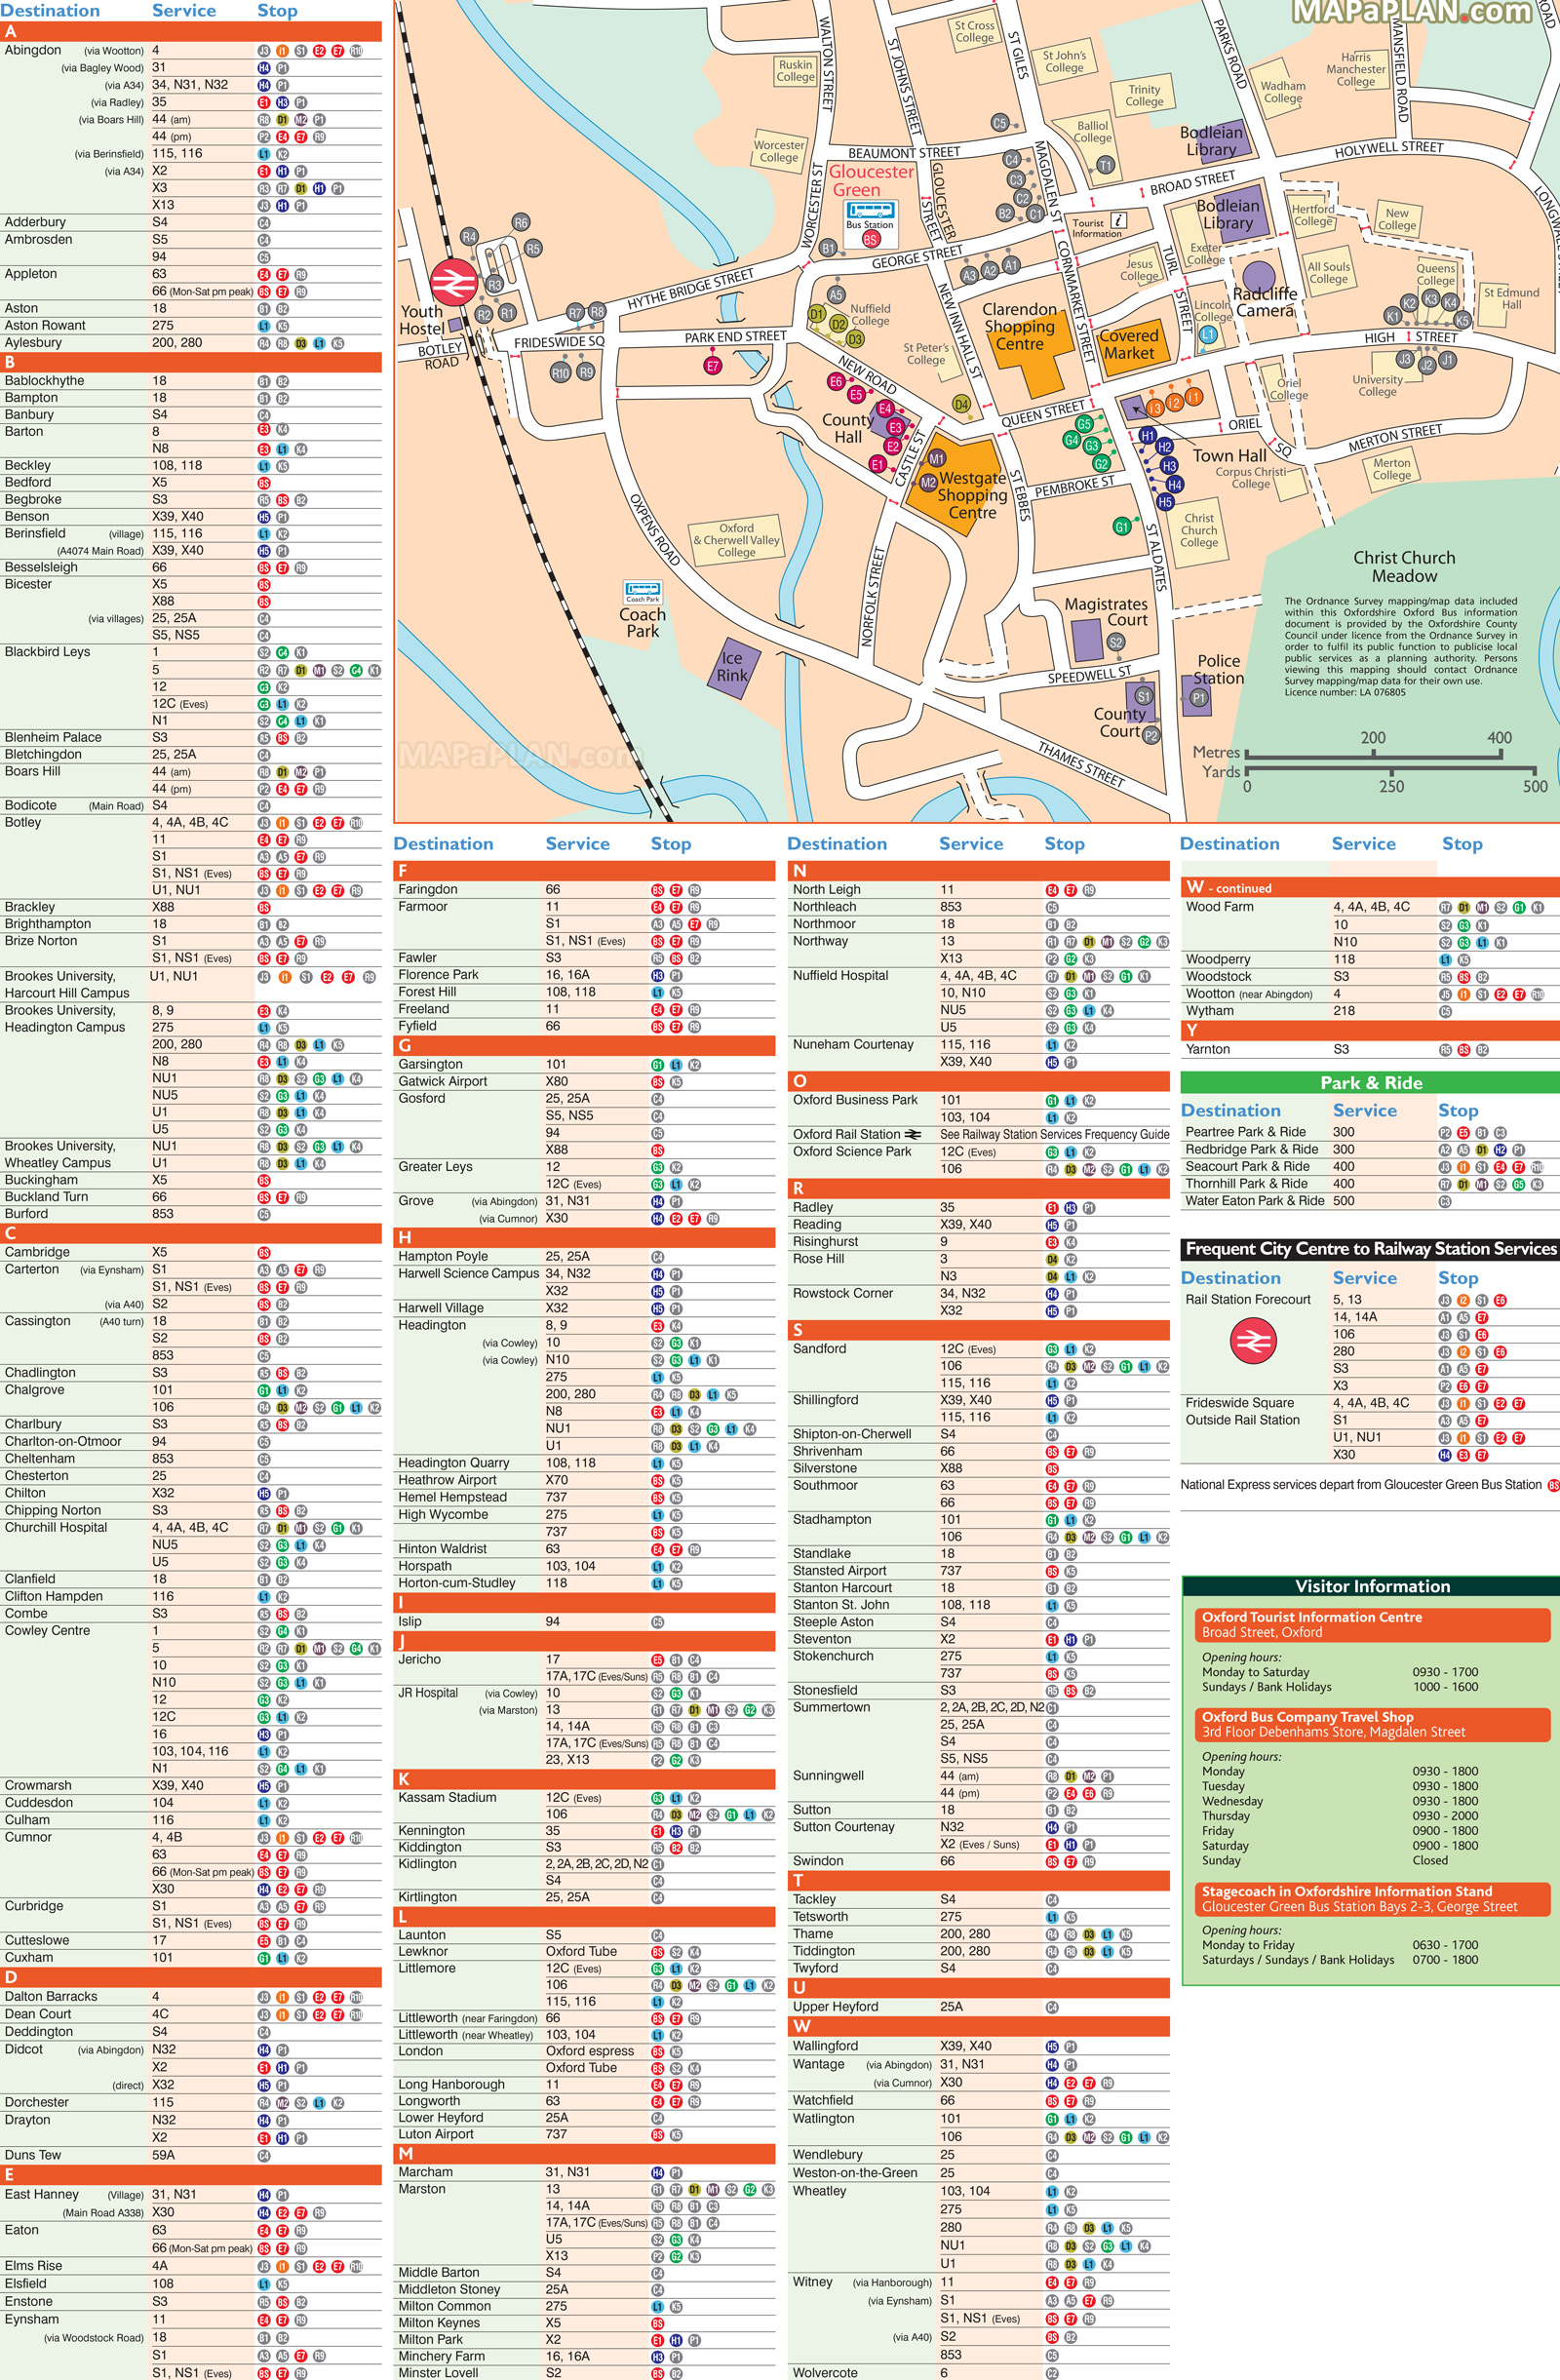 Official city centre bus stops rail line station Covered Market shopping directions Oxford top tourist attractions map